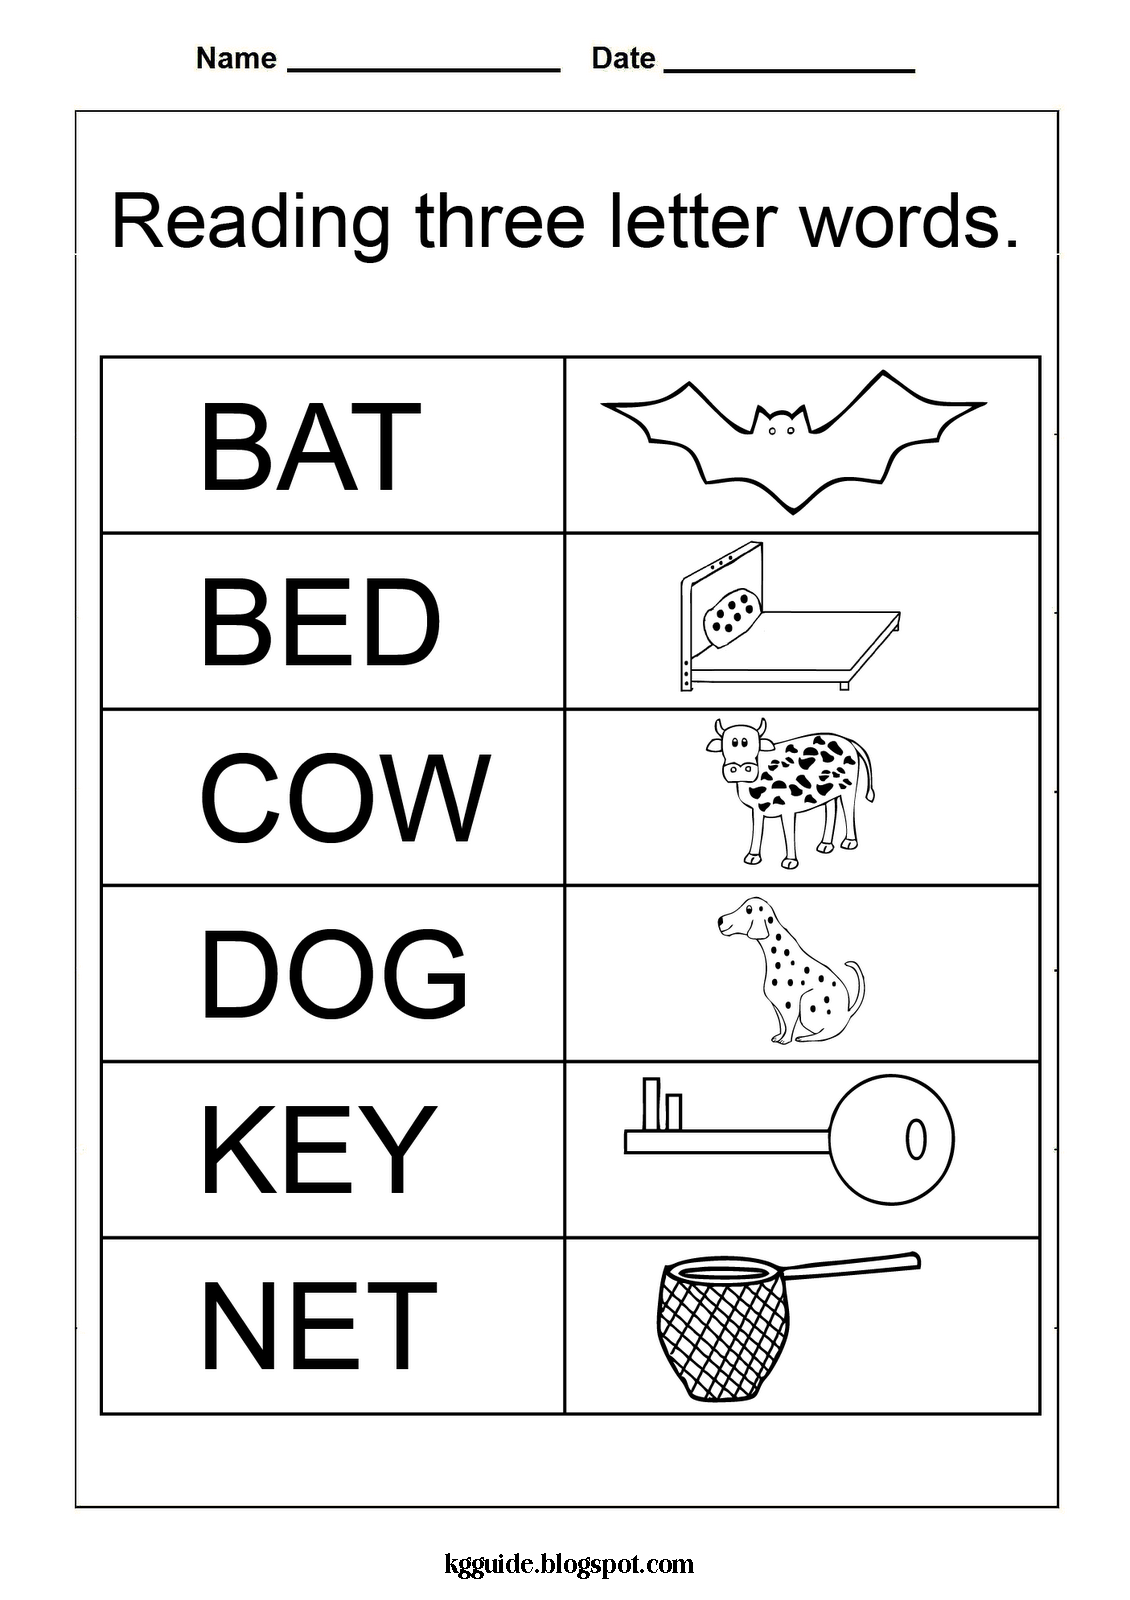 English Three Letter Words Worksheets